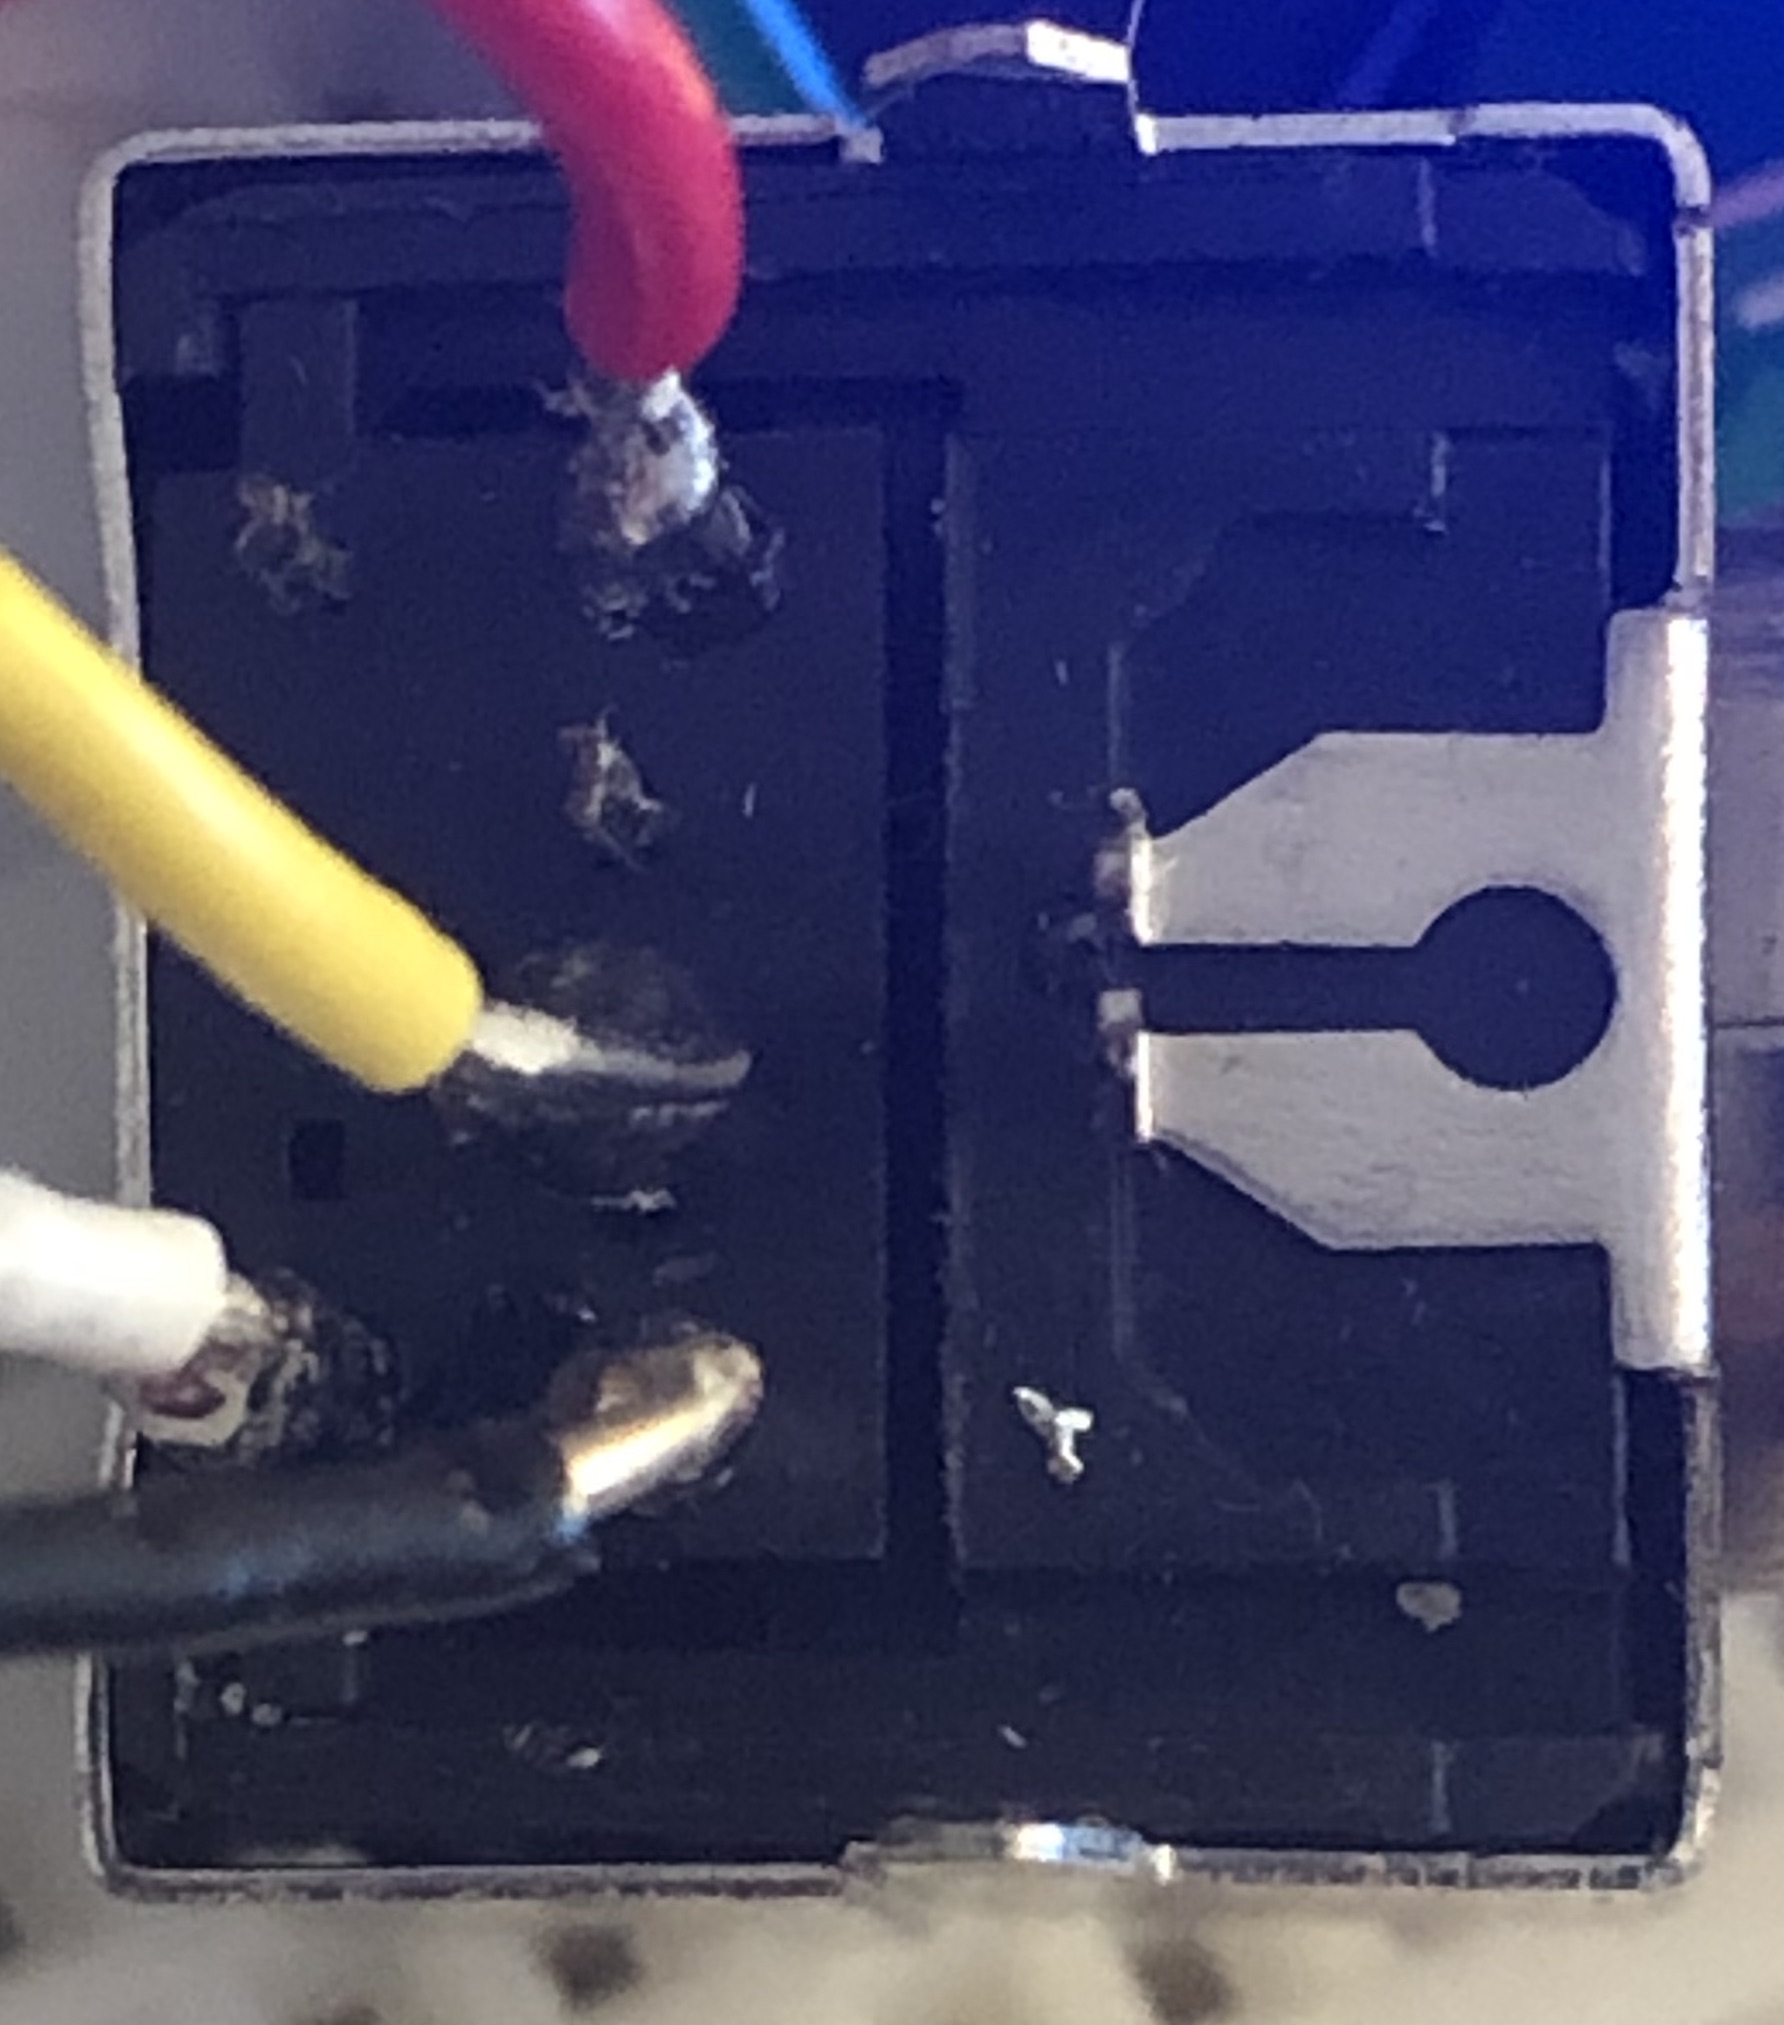 PS/2 connector soldered to four wires